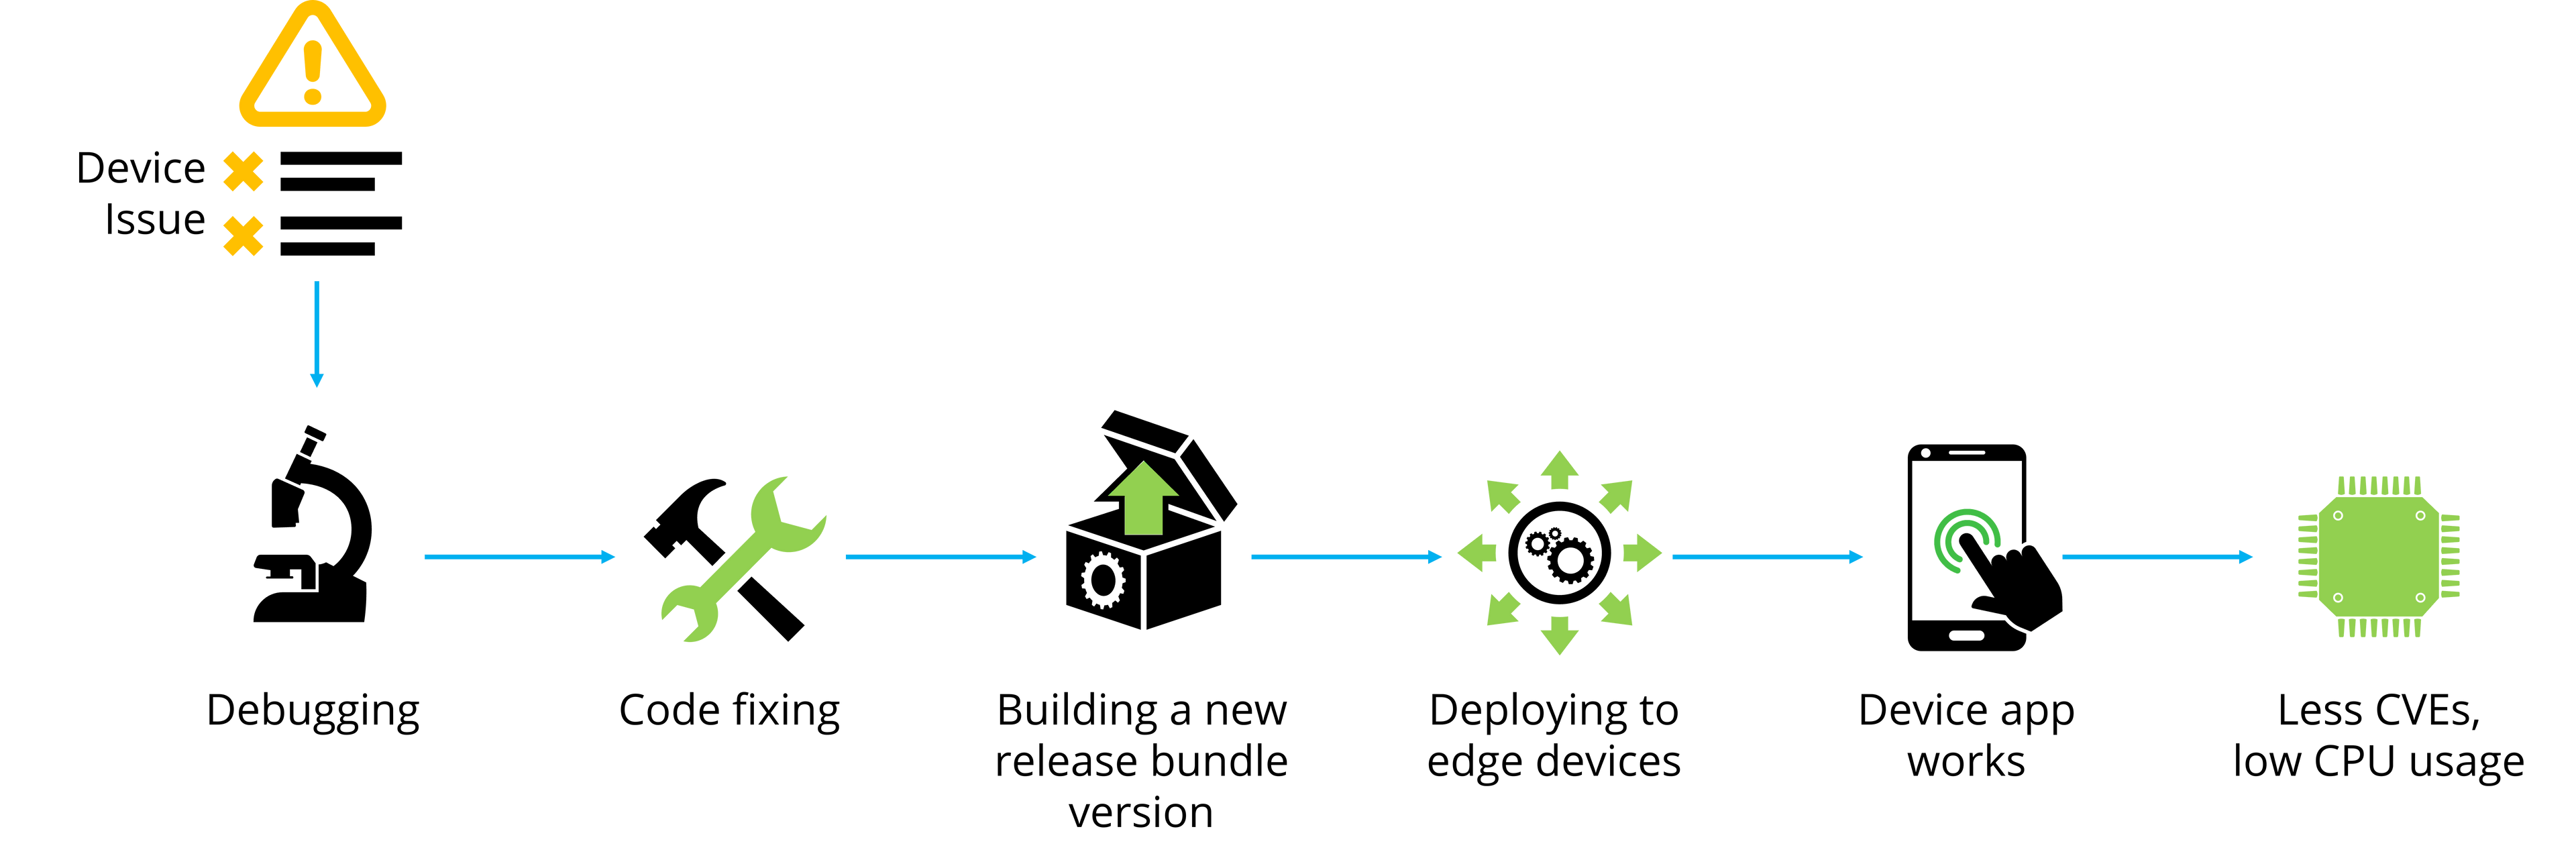 Yalla DevOps - software update flow for IoT devices